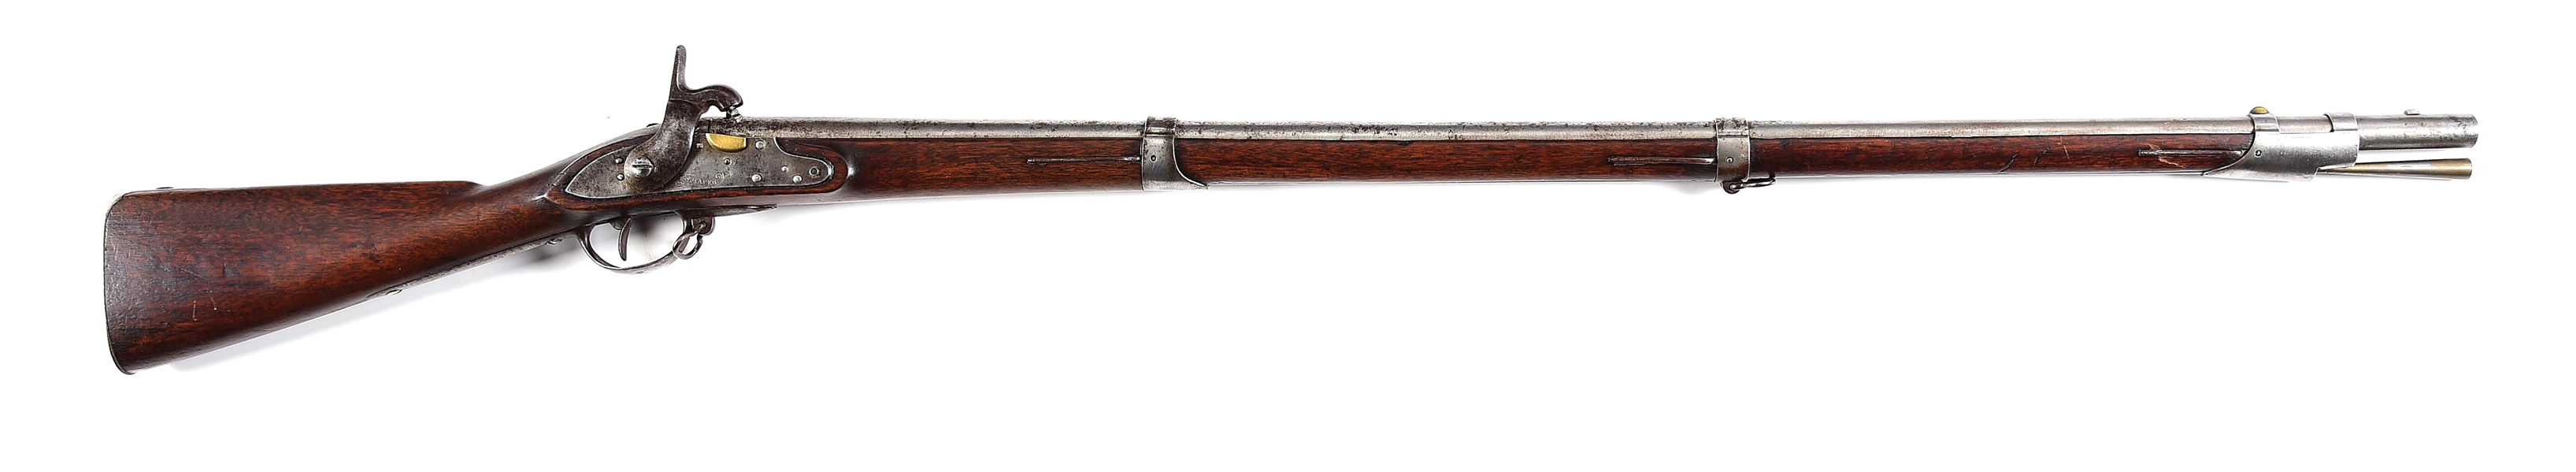 (A) MASSACHUSETTS MARKED M1812 CONVERSION WHITNEY CONTRACT MUSKET.